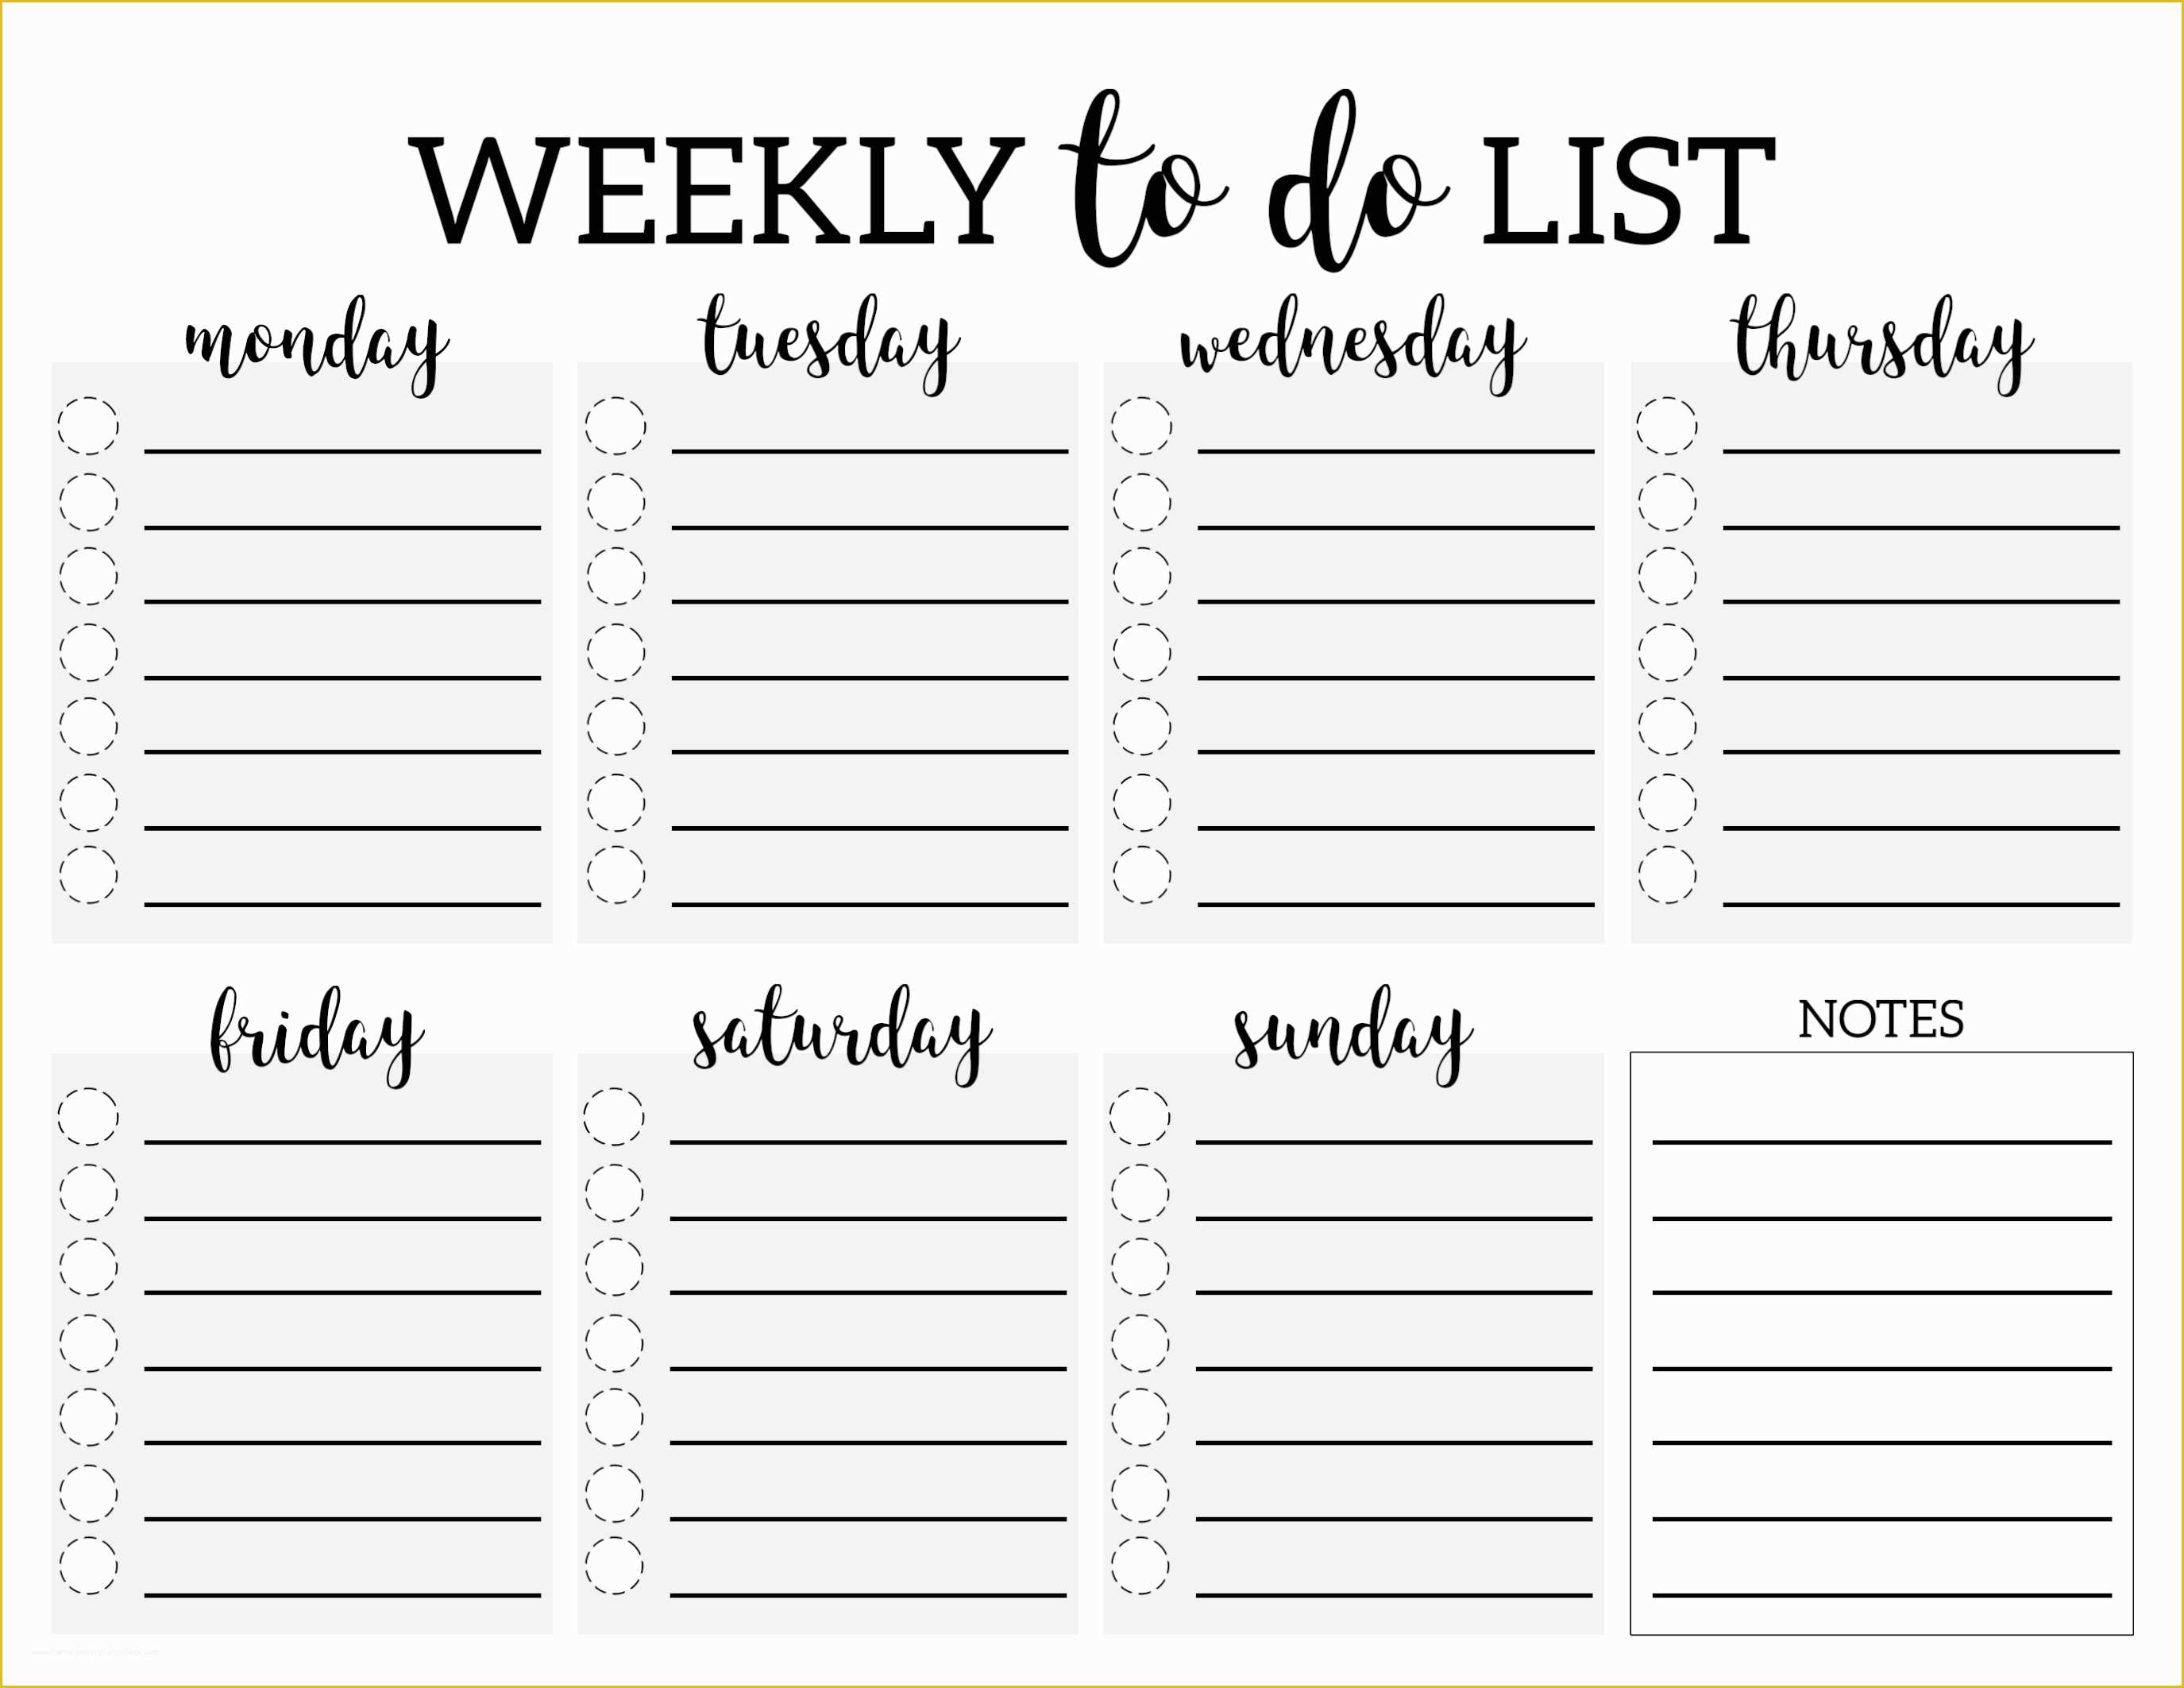 free-editable-to-do-list-template-of-free-printable-to-do-list-heritagechristiancollege